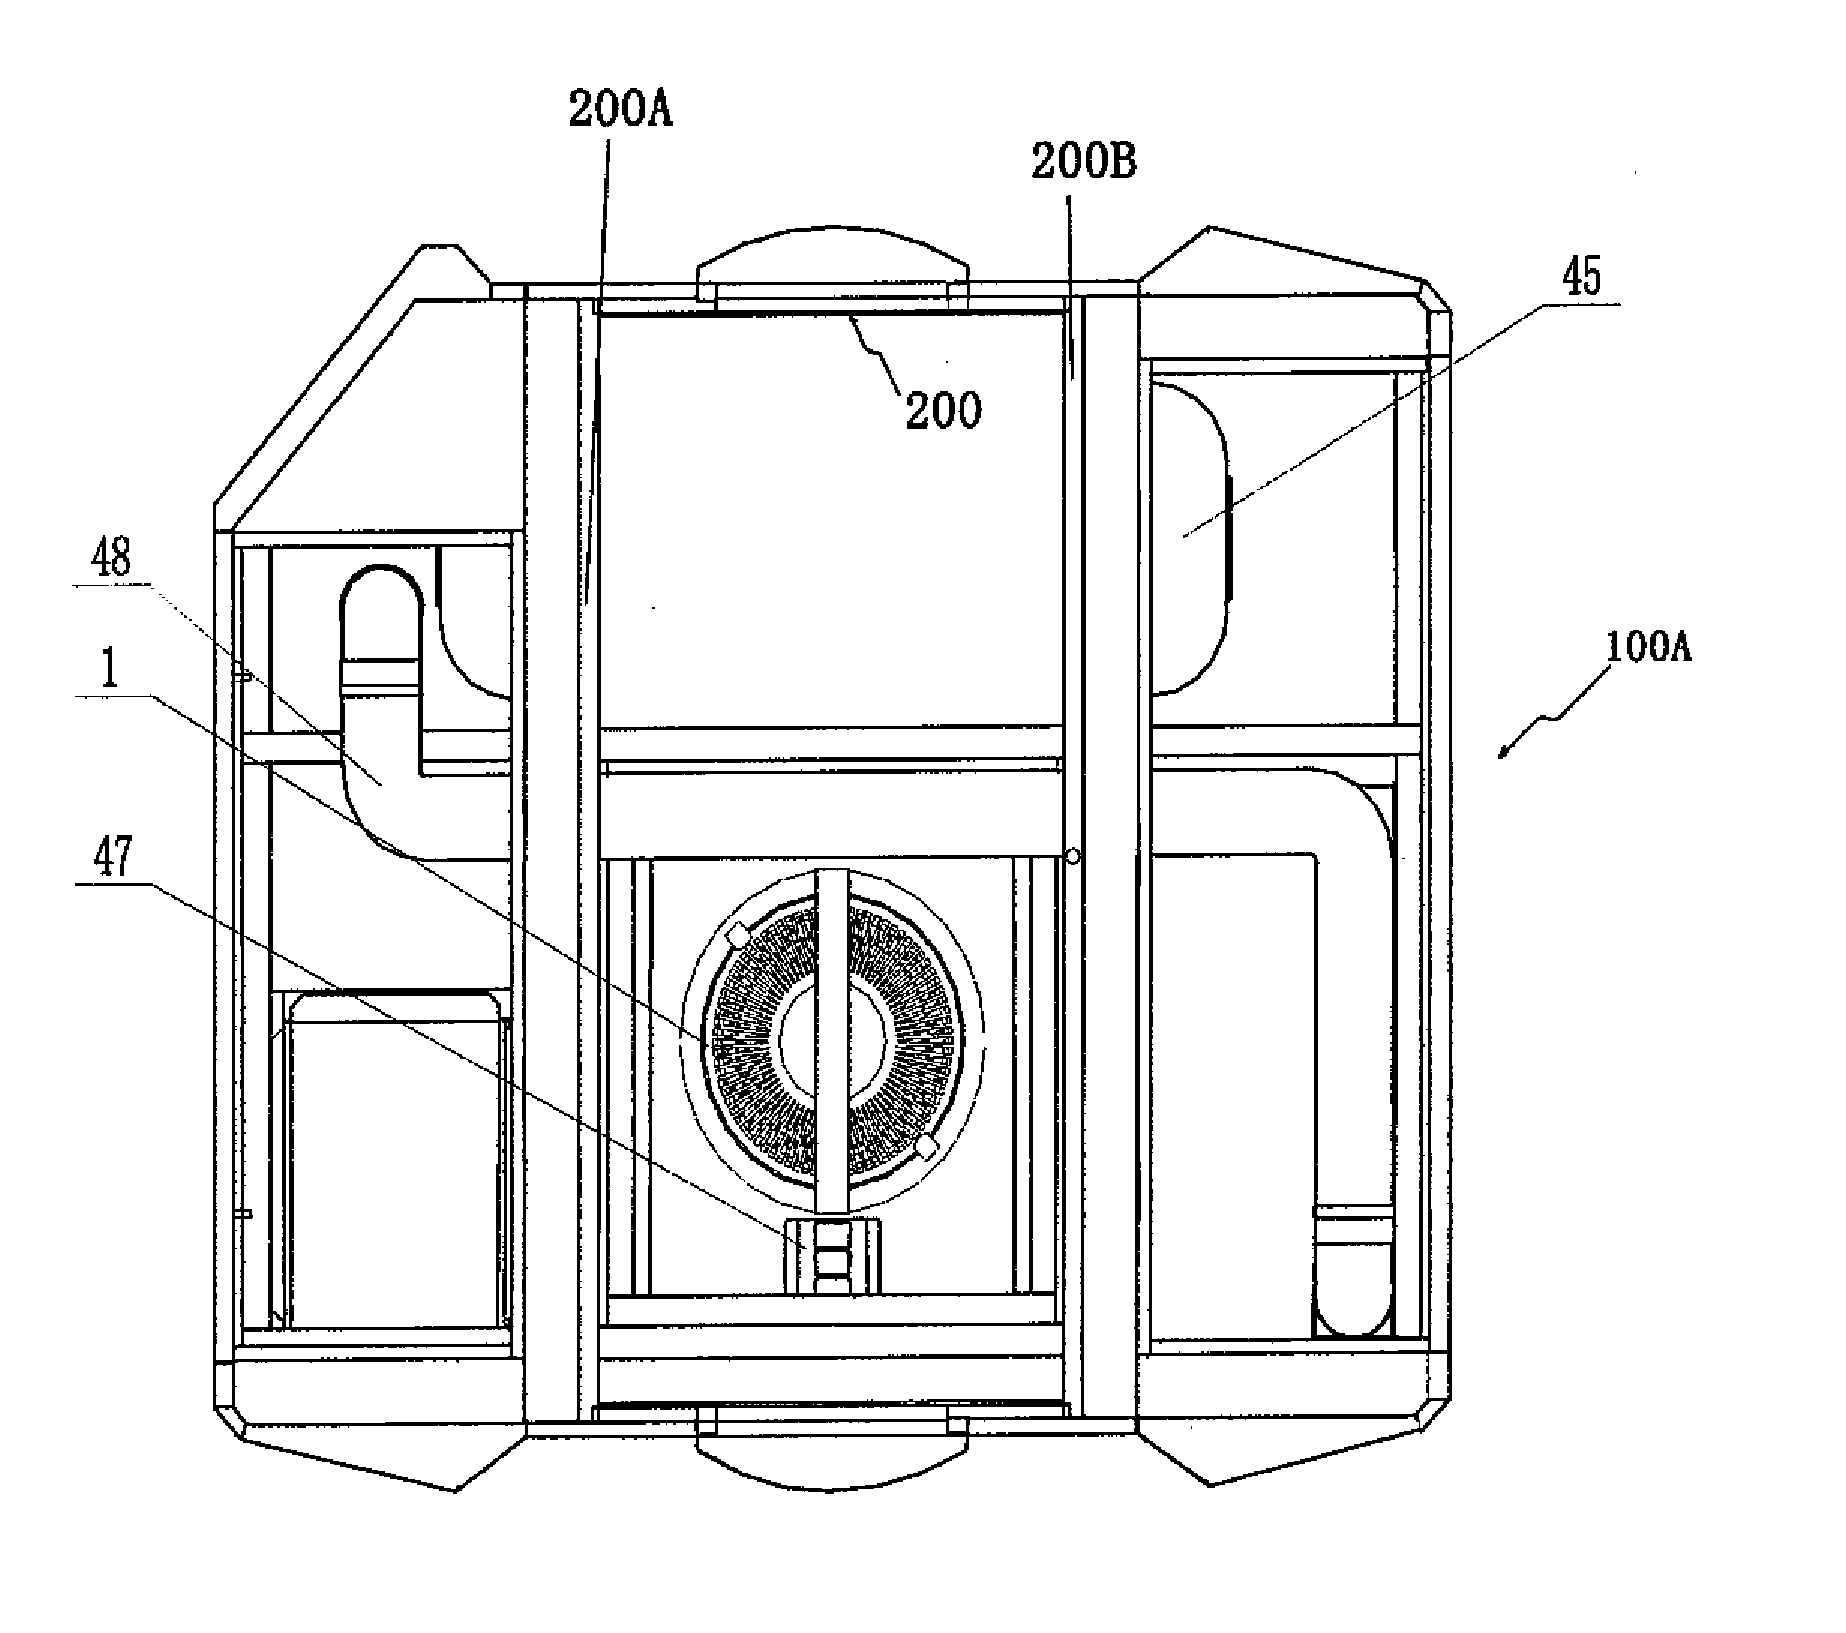 Door-type passenger security inspection apparatus and method for detecting contraband articles such as narcotic drugs, explosives